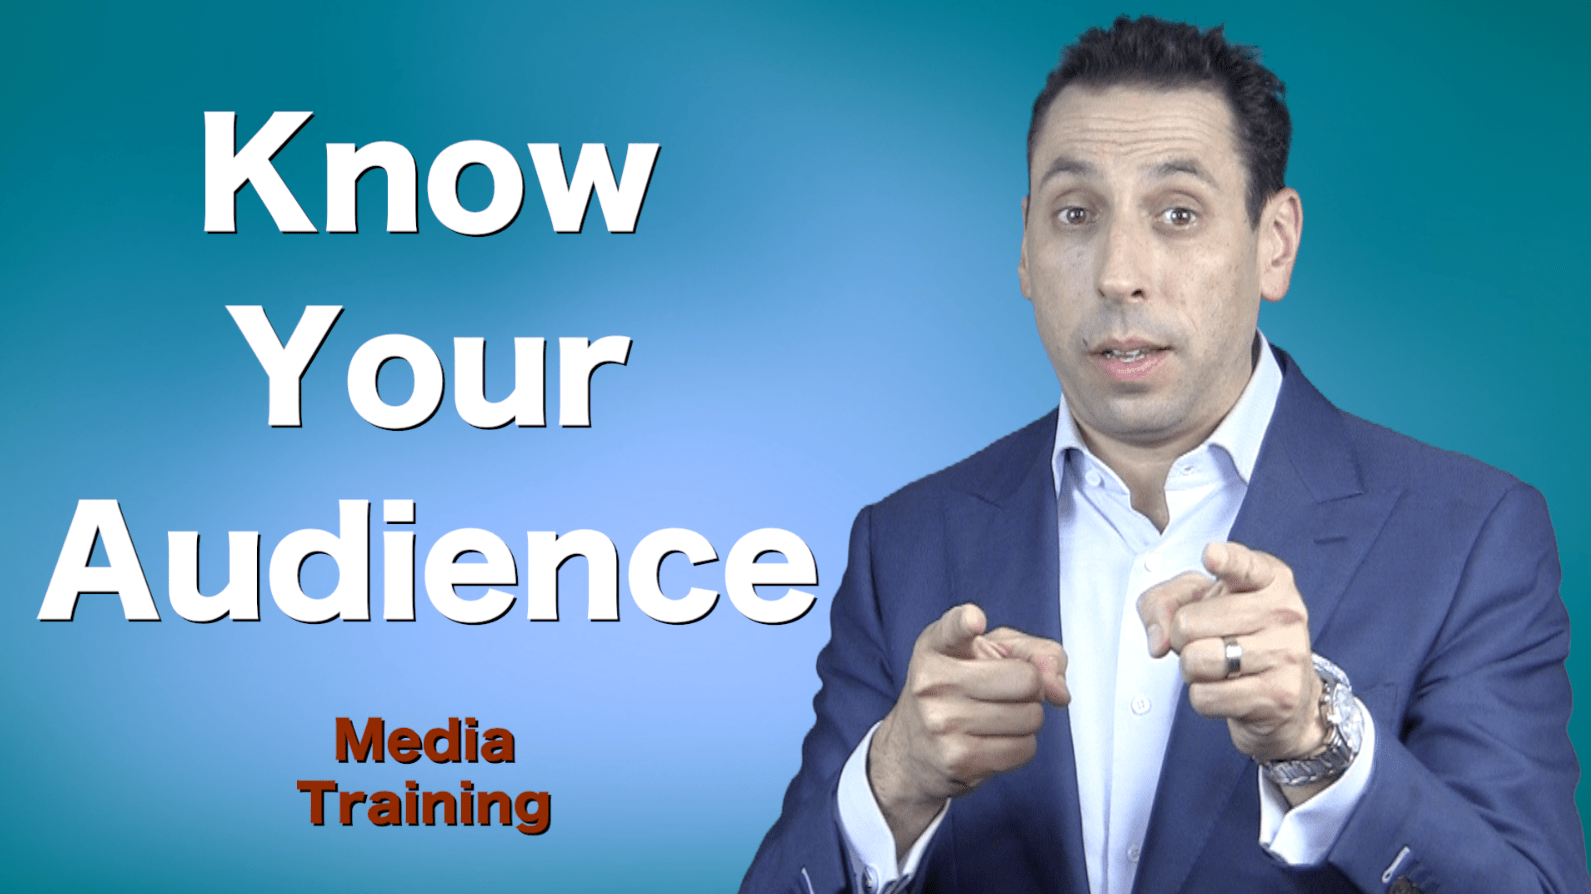 Media Training – Know Your Audience